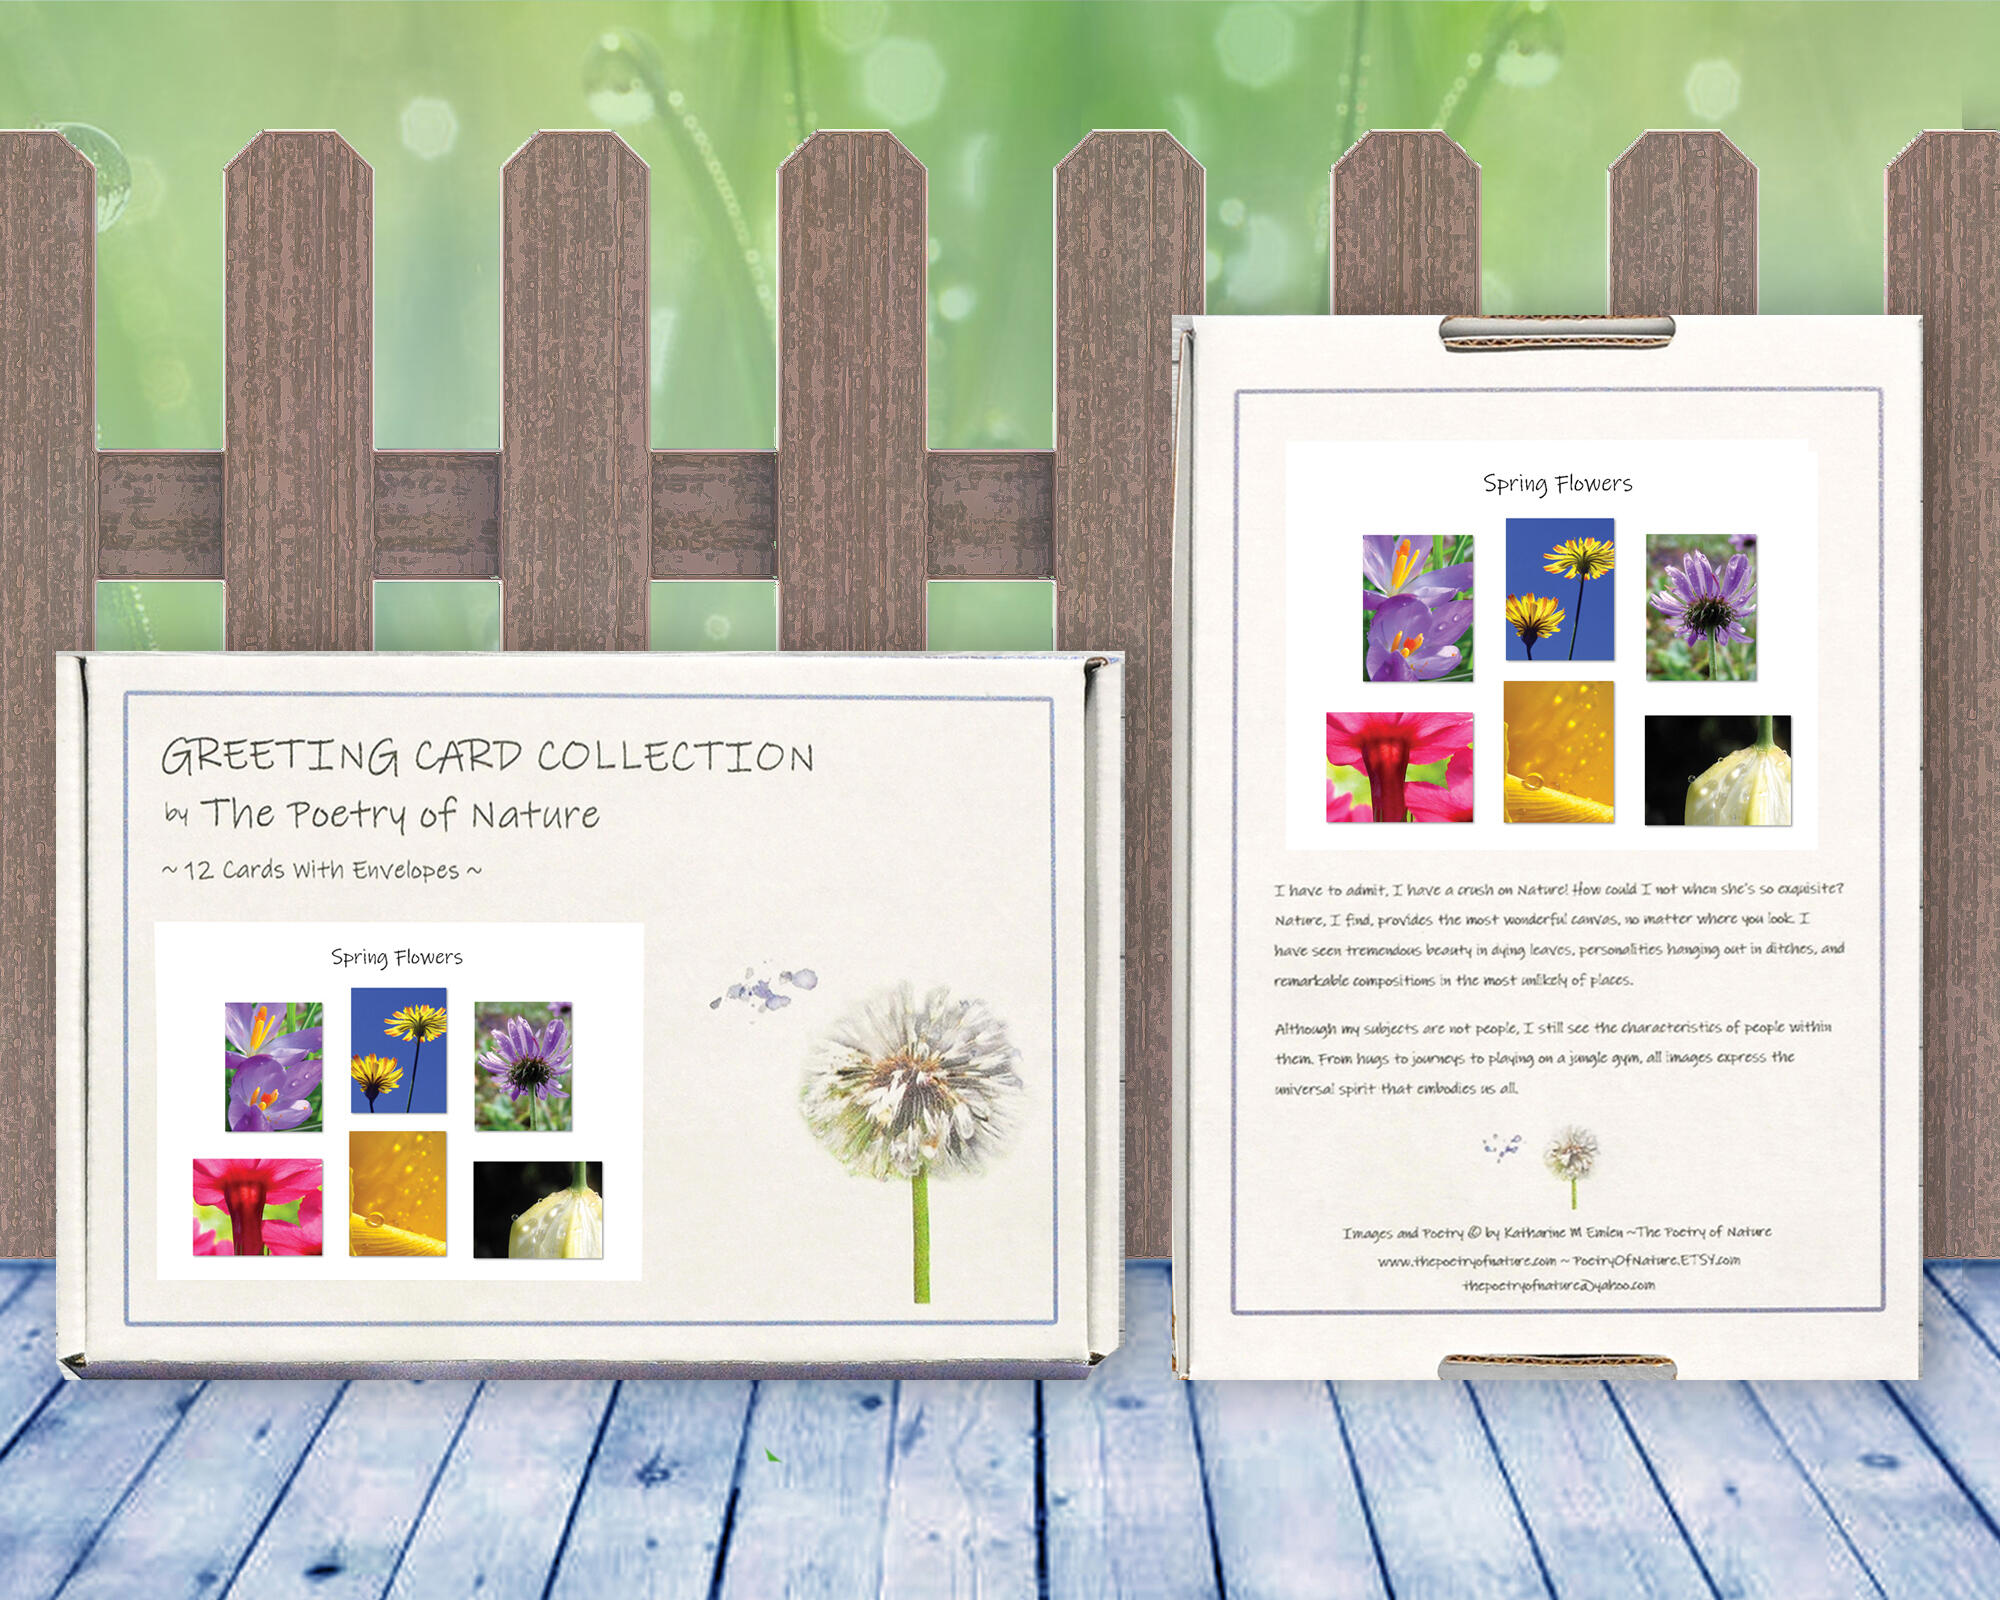 Spring Flowers - Greeting Card Collection by The Poetry of Nature